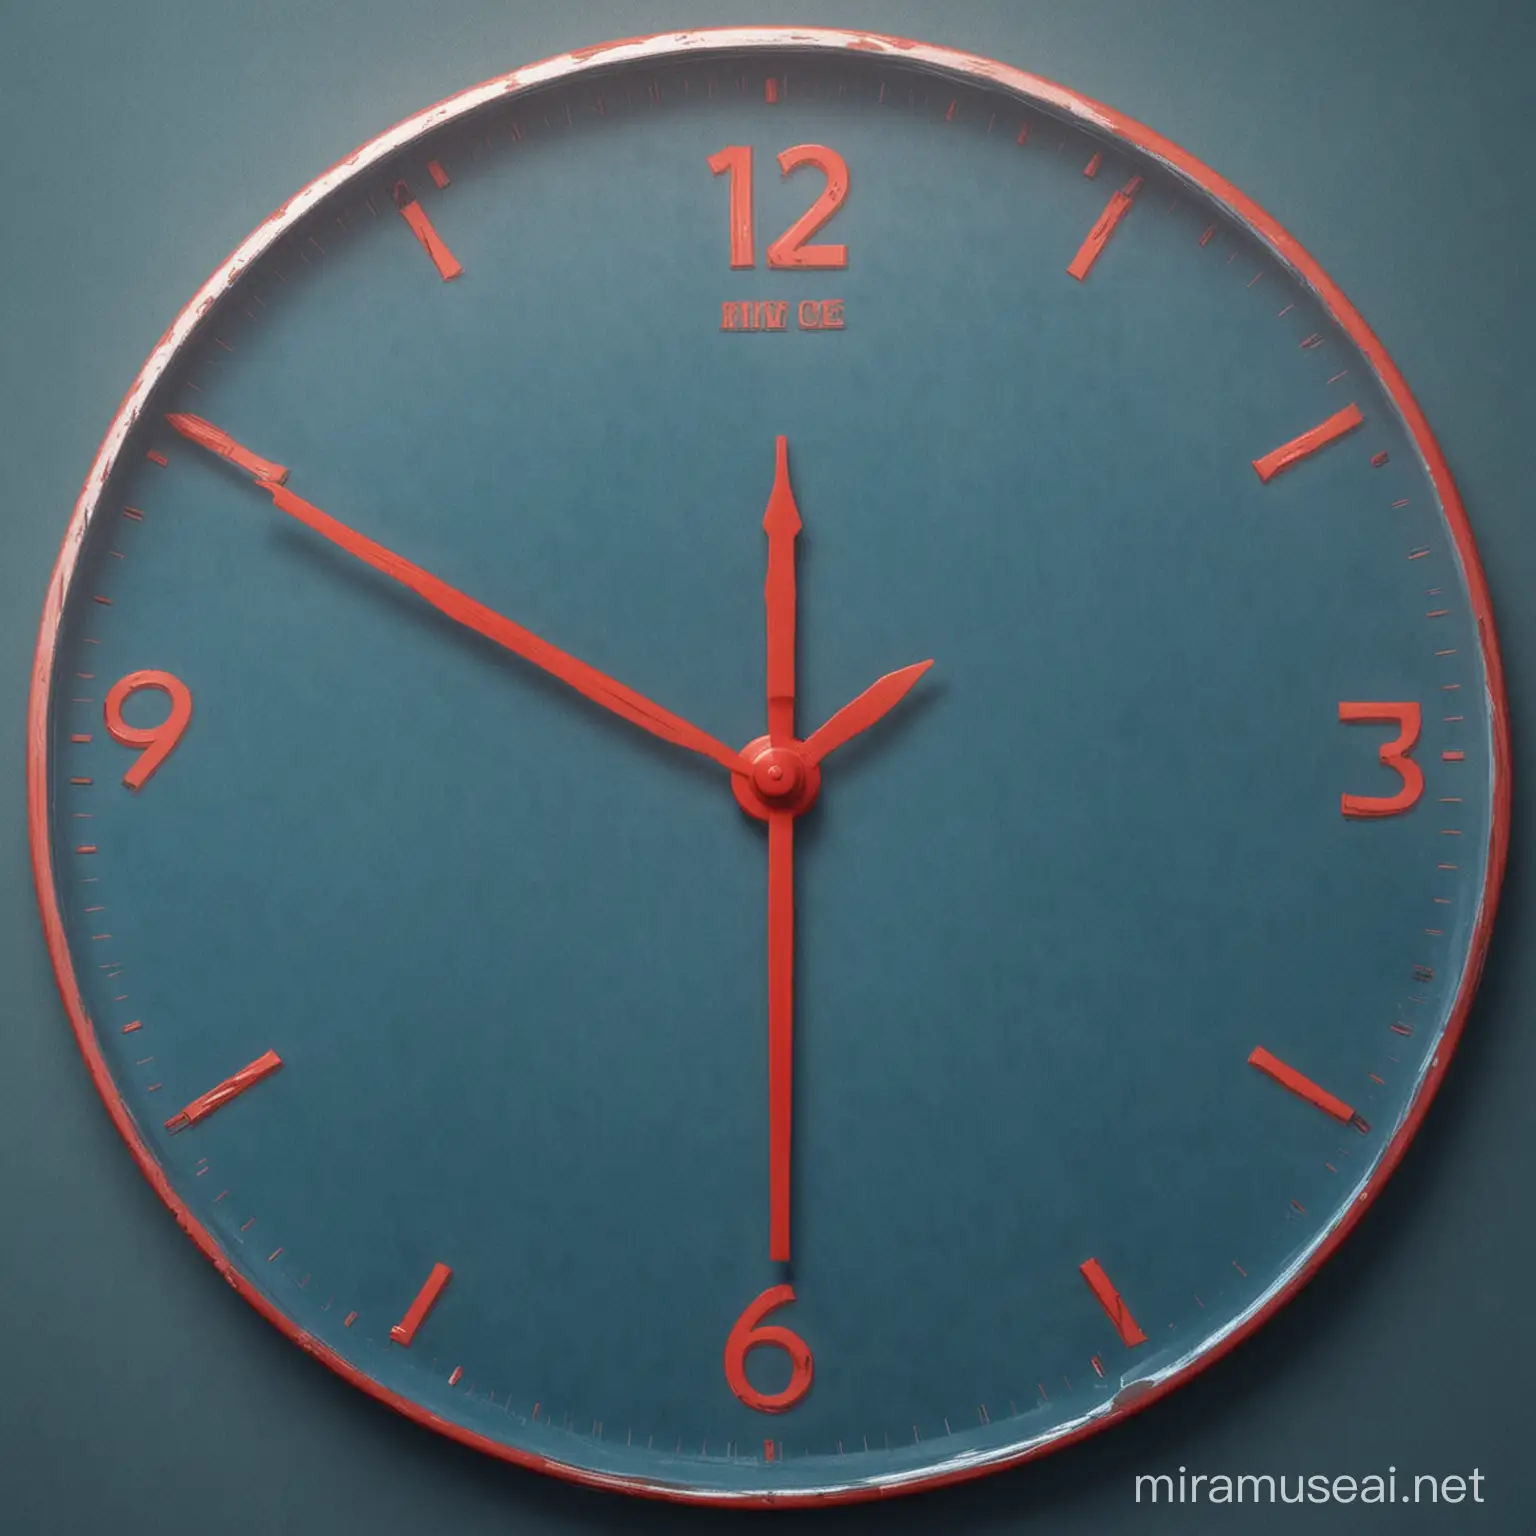 The image of the clock is blue, the clock hands are red
